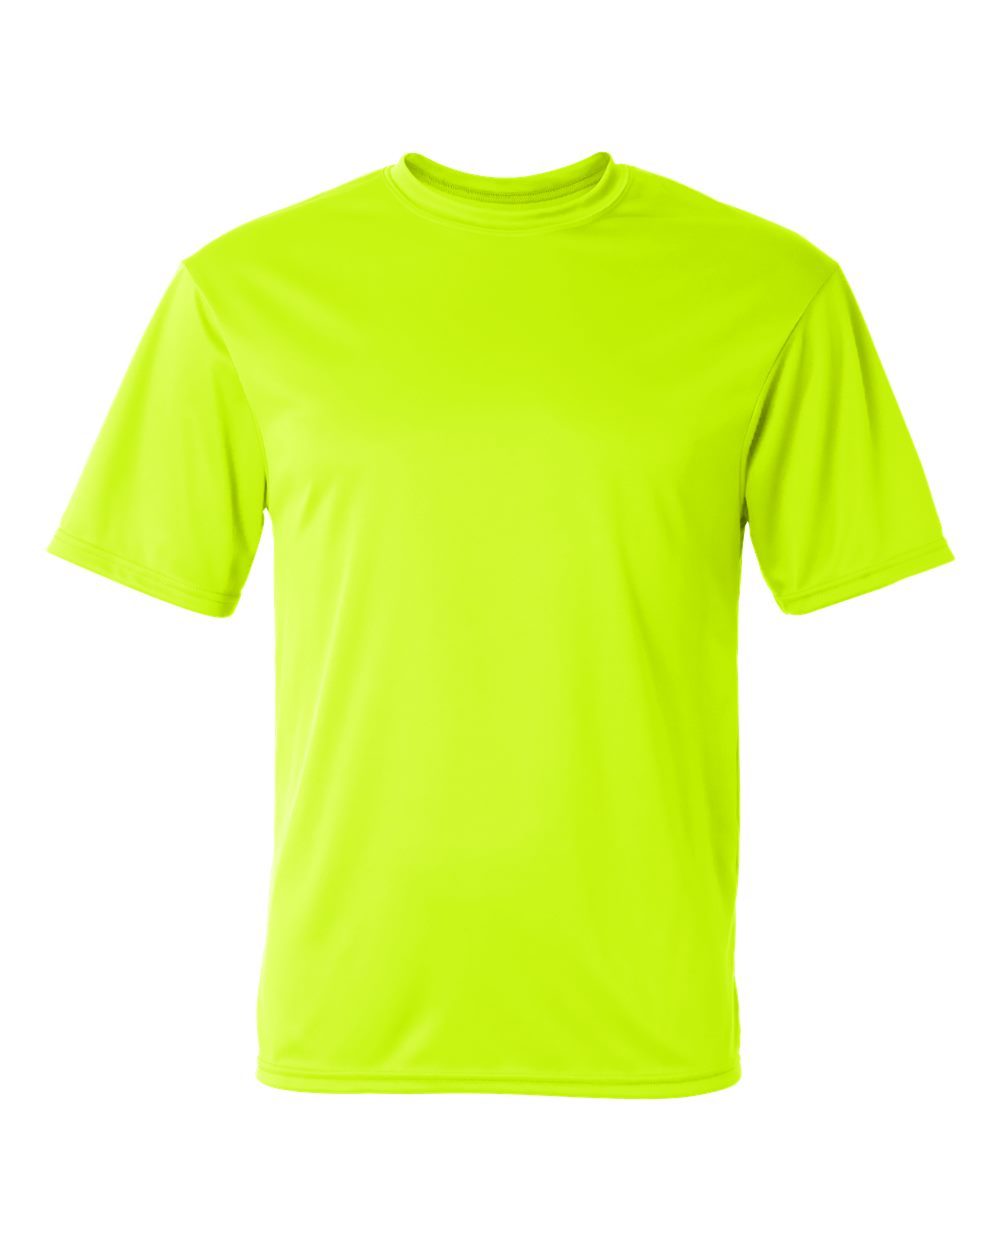 C2 Sport 5100 Performance Shirt :: Safety Yellow, Size S